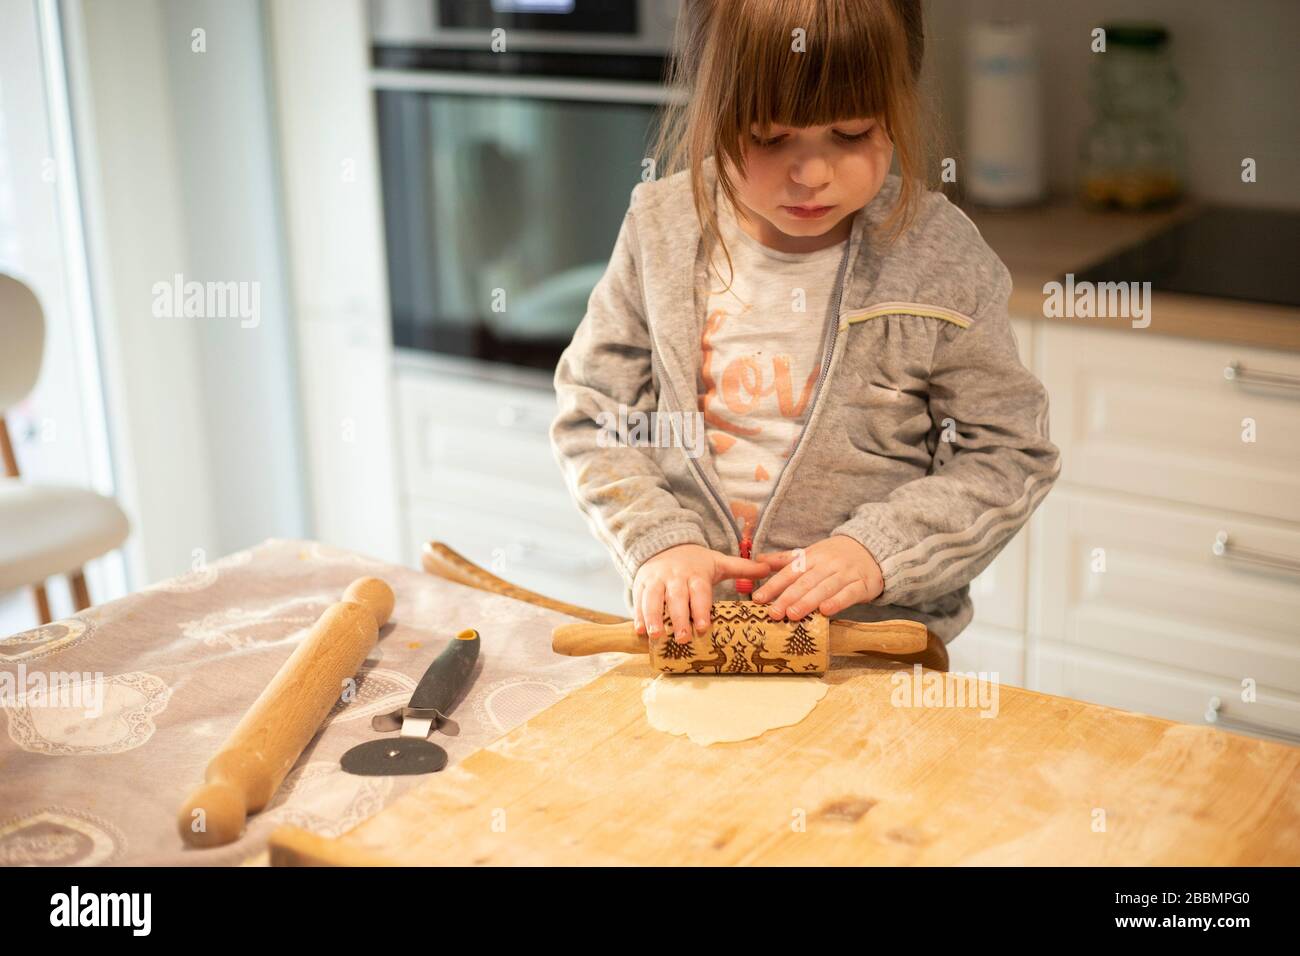 Child girl, 3 years old, in white kitchen, flattening pizza dough with a rolling pin on a wooden board. Lockdown activity idea. Stock Photo